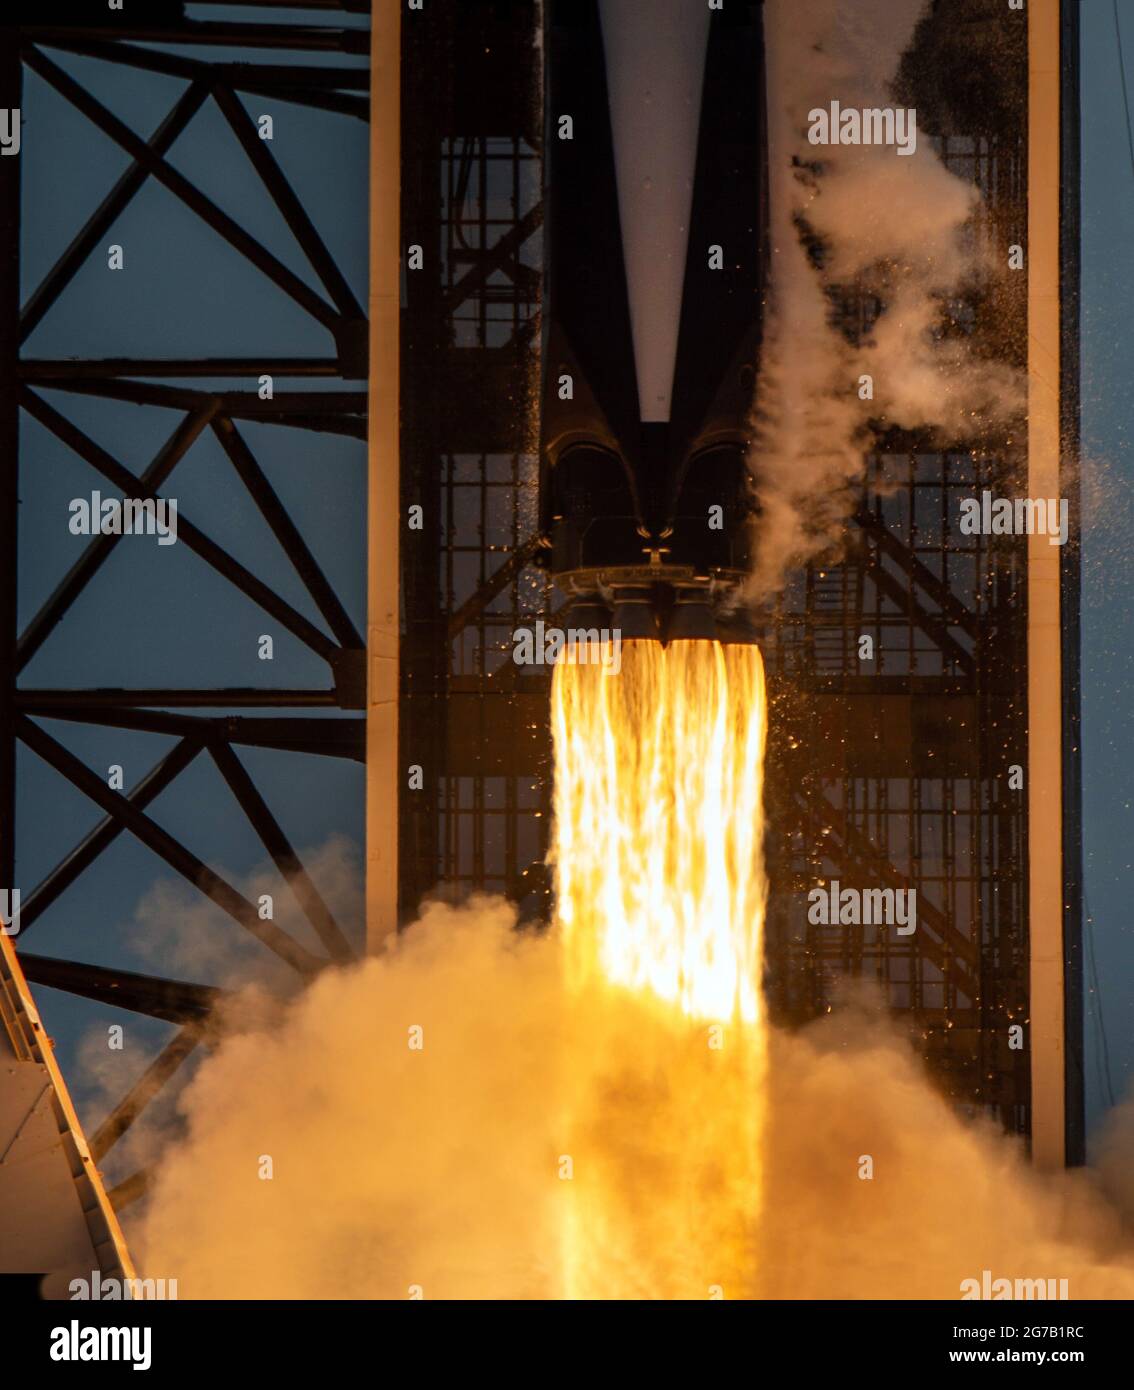 A SpaceX Falcon 9 rocket carrying the company's Crew Dragon spacecraft is launched on NASA’s SpaceX Demo-2 mission to the International Space Station. 30 May 2020, Kennedy Space Center, Florida. The Demo-2 mission is the first launch with astronauts of the SpaceX Crew Dragon spacecraft and Falcon 9 rocket to the International Space Station as part of the agency’s Commercial Crew Program. A unique, optimised and digitally enhanced version of an NASA image by J Kowsky/ credit NASA Stock Photo